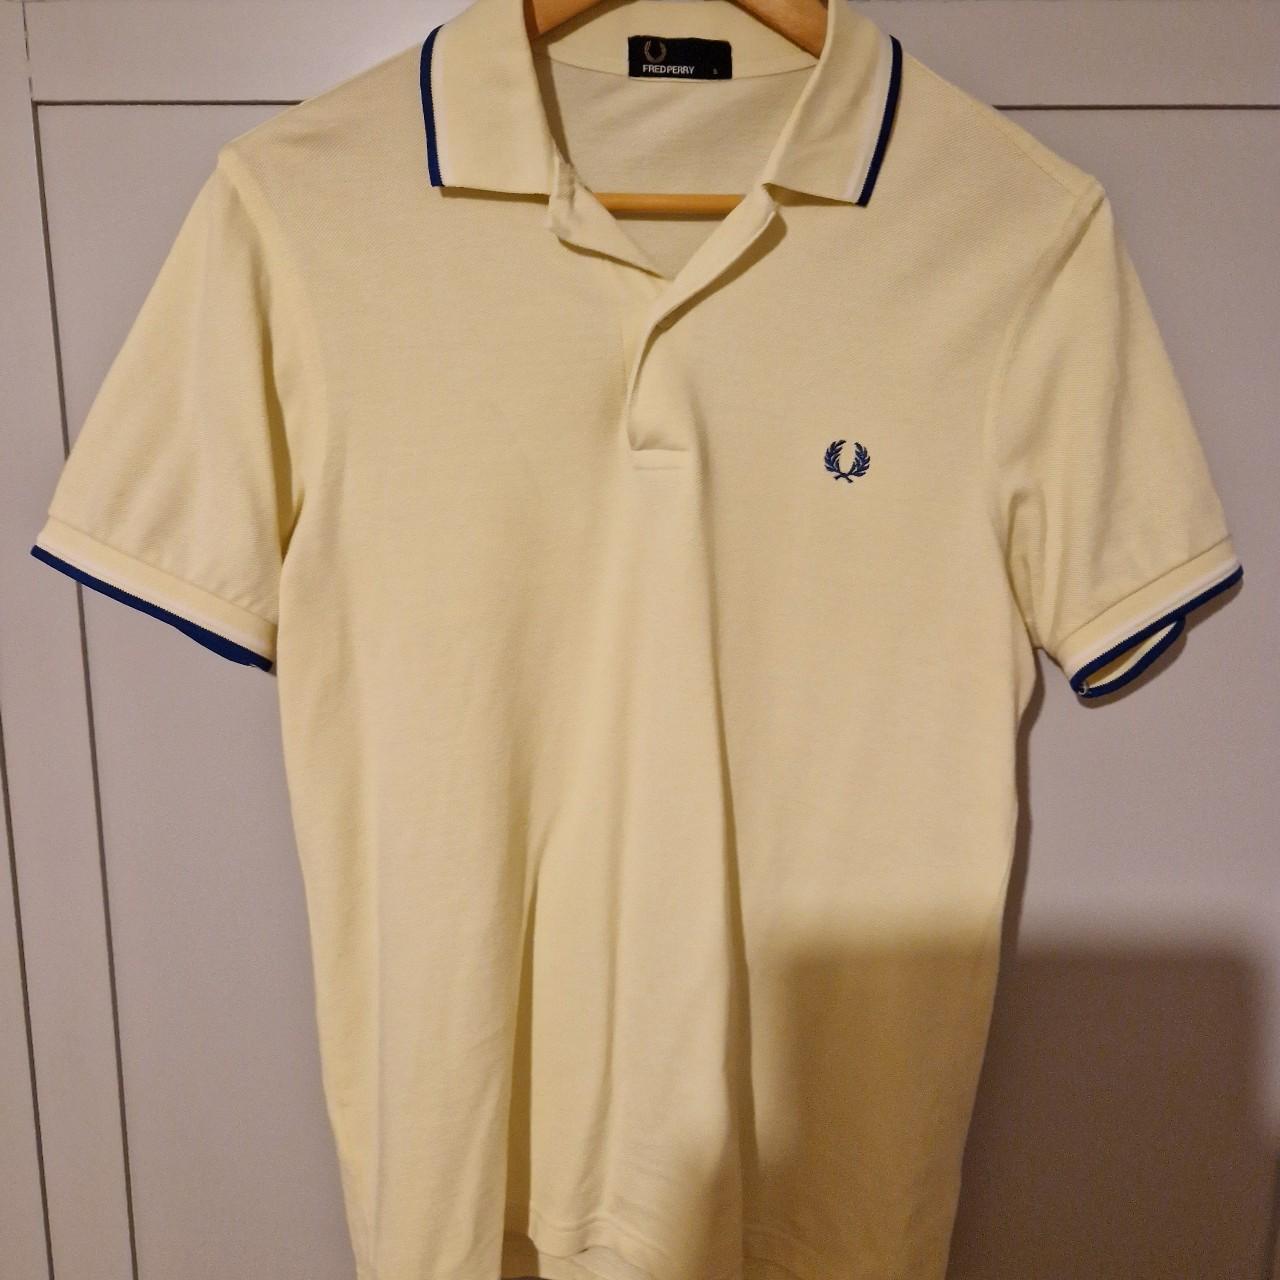 Fred Perry medium polo shirt hardly worn but in good... - Depop